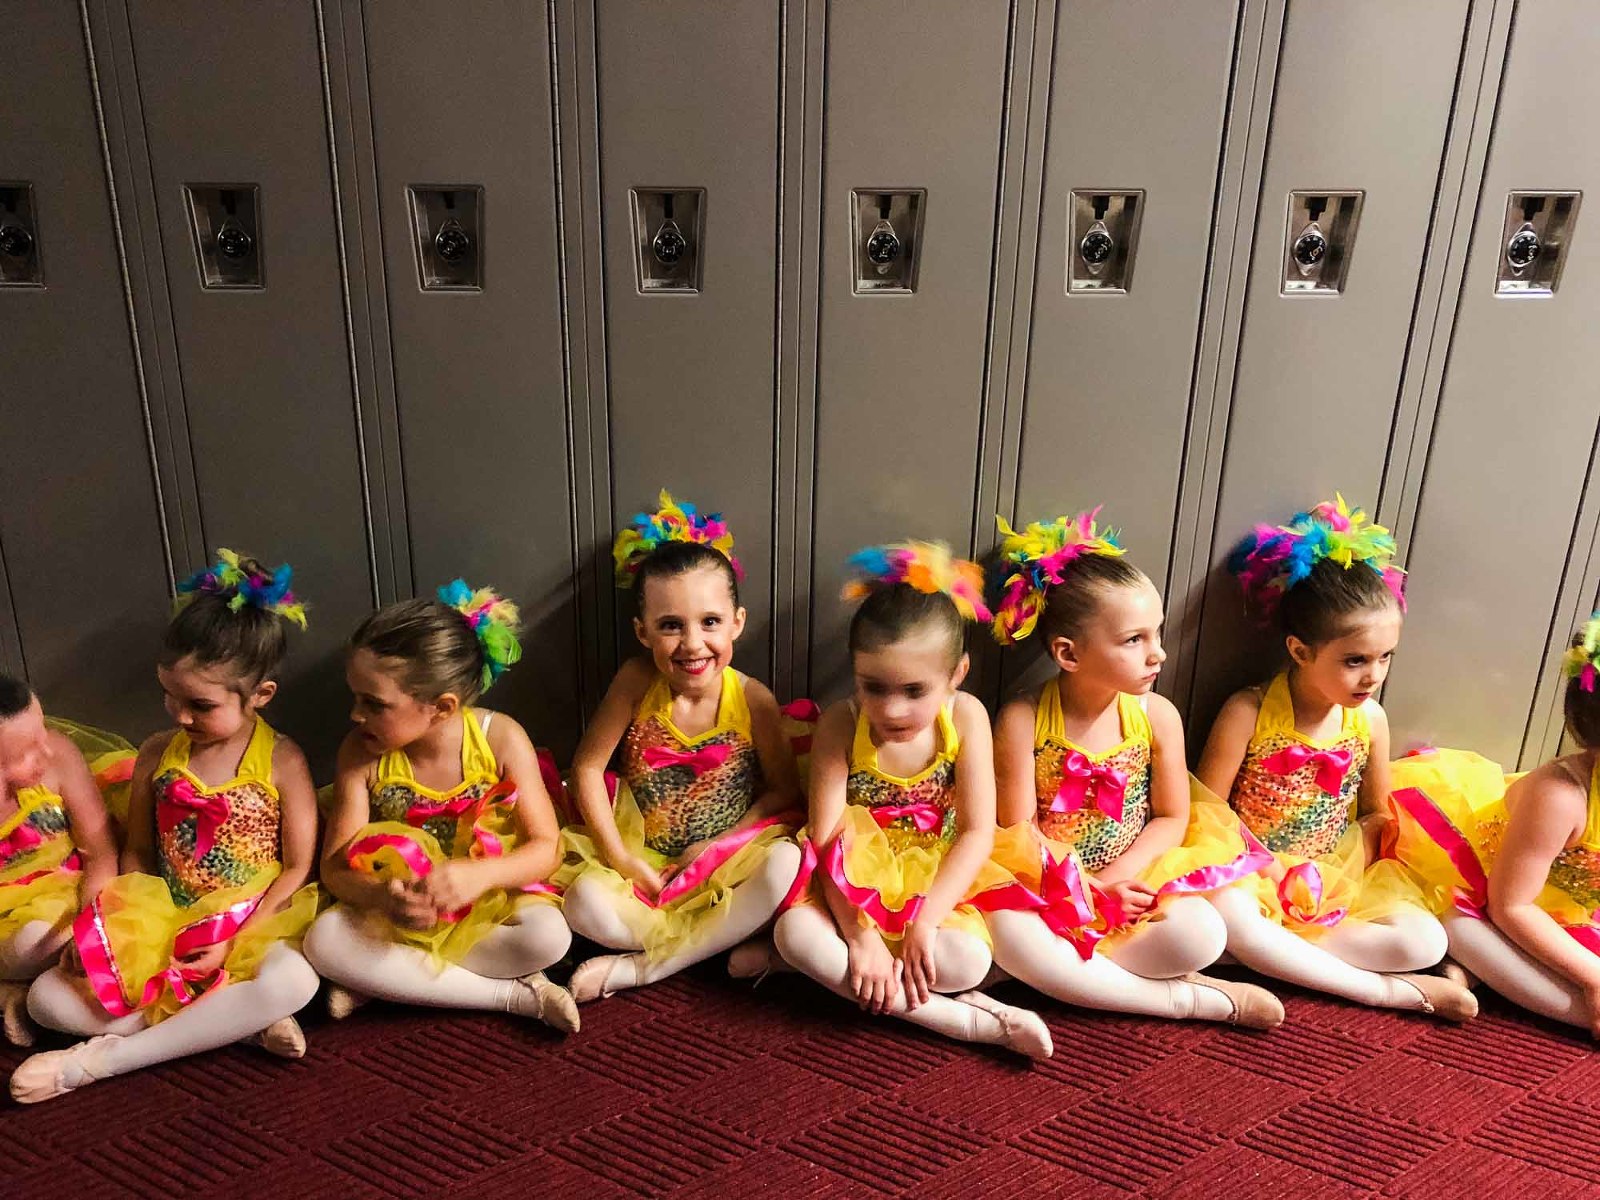 ballerinas lined up ready to go on the stage, in yellow and pink tutus, seated in front of a row of school lockers